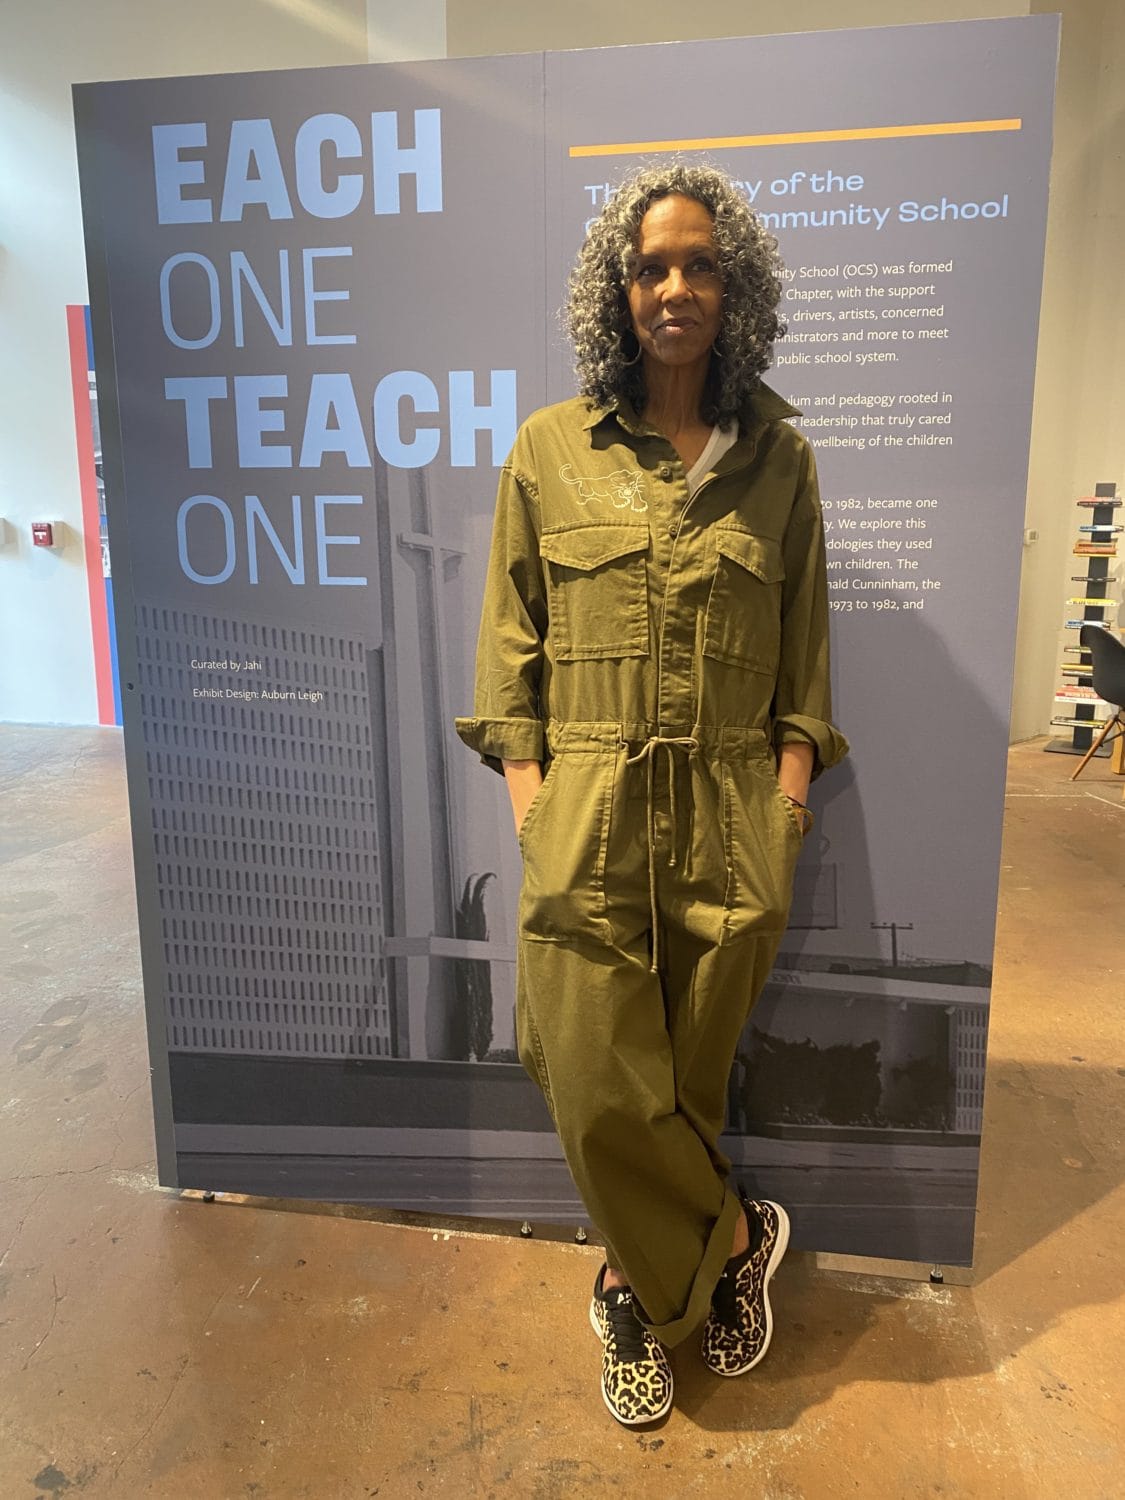 Black-Panther-Party-Museum-Fredrika-Newton-‘Each-One-Teach-One-exhibit-by-Tiffany-Caesar, The People’s Narrative: The Black Panther Party Museum in Oakland, Culture Currents Featured Local News & Views 